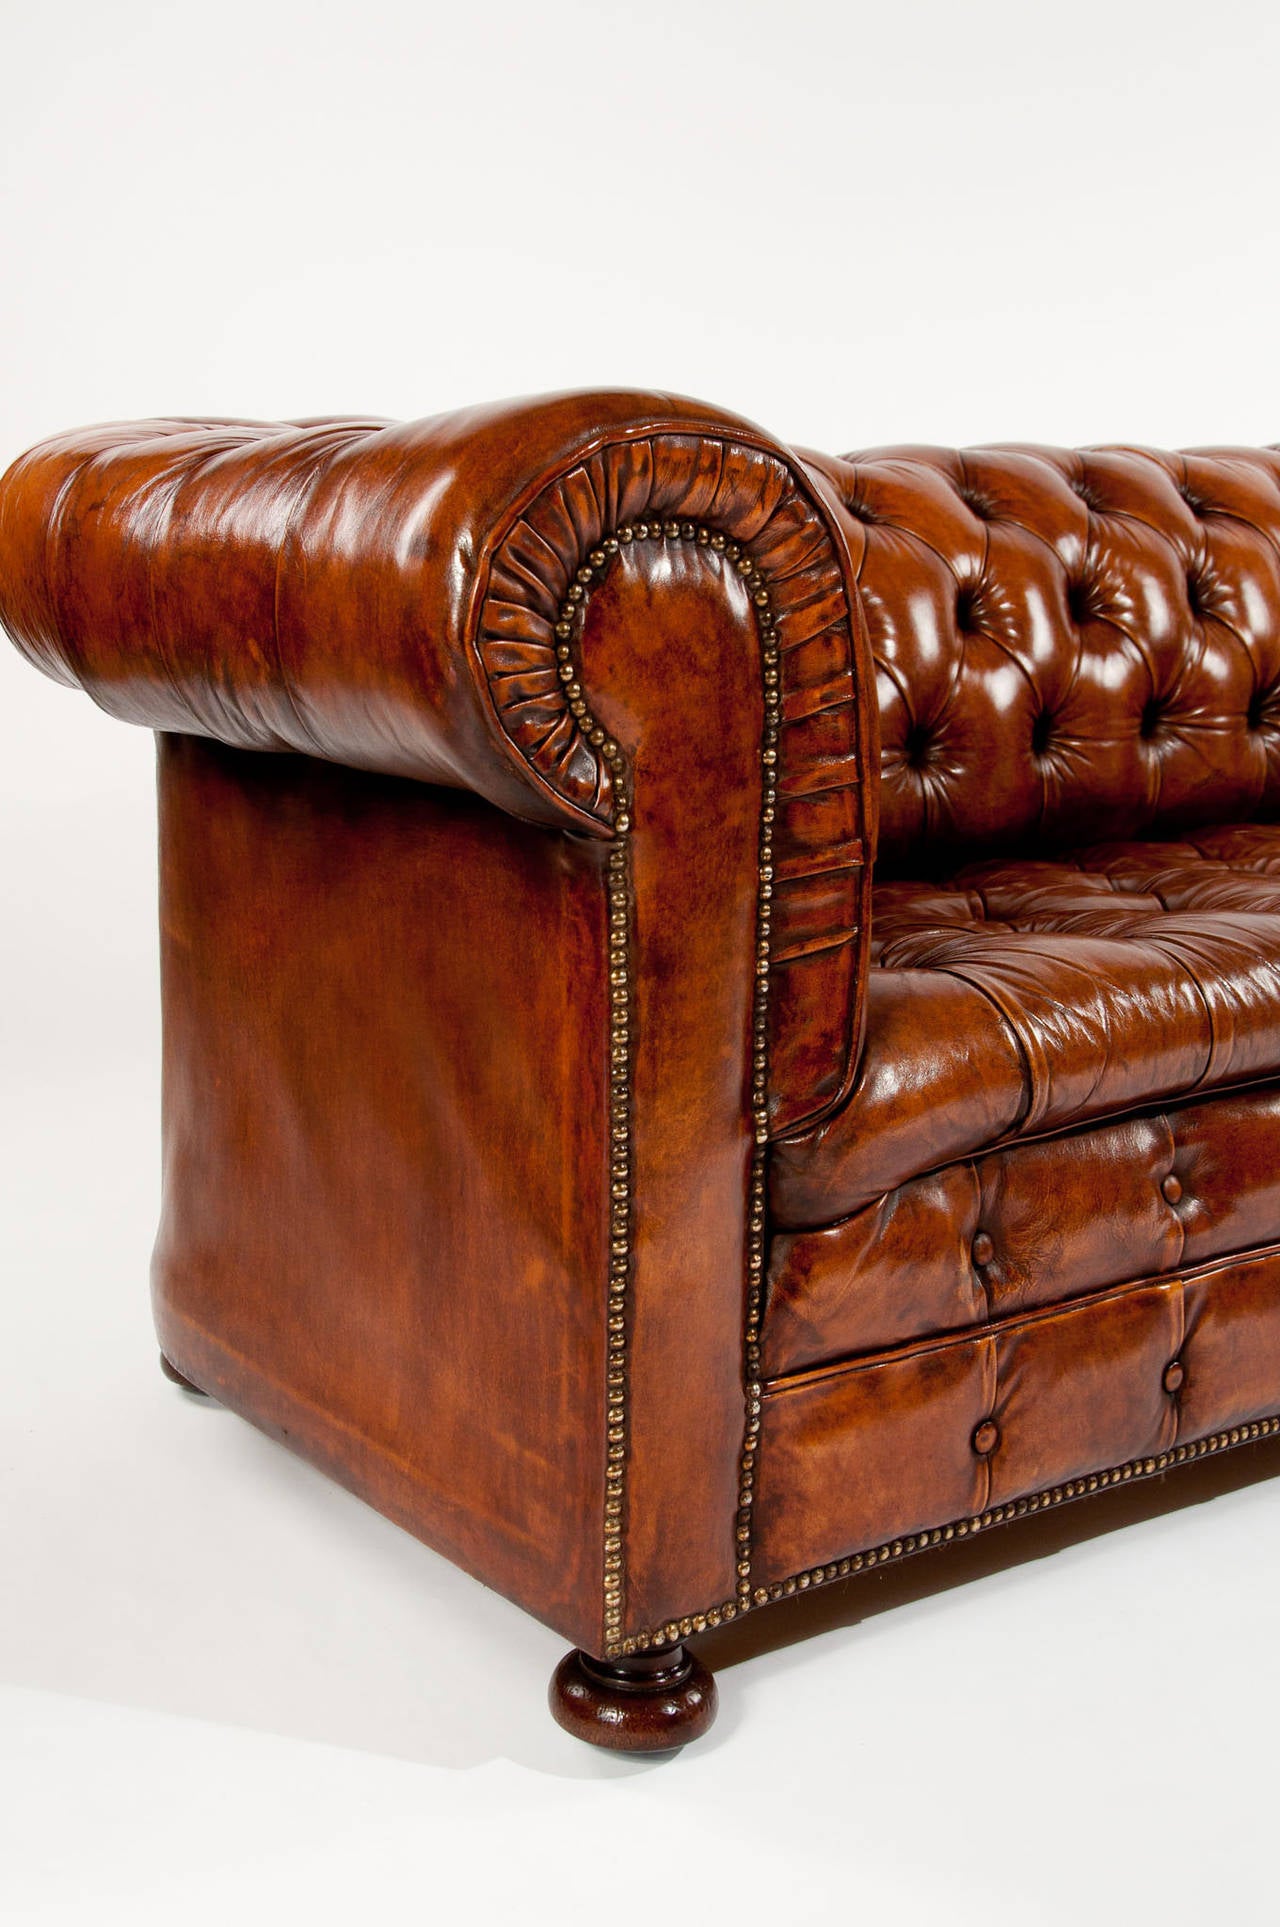 Quality Antique Leather Chesterfield Sofa In Excellent Condition In Benington, Herts